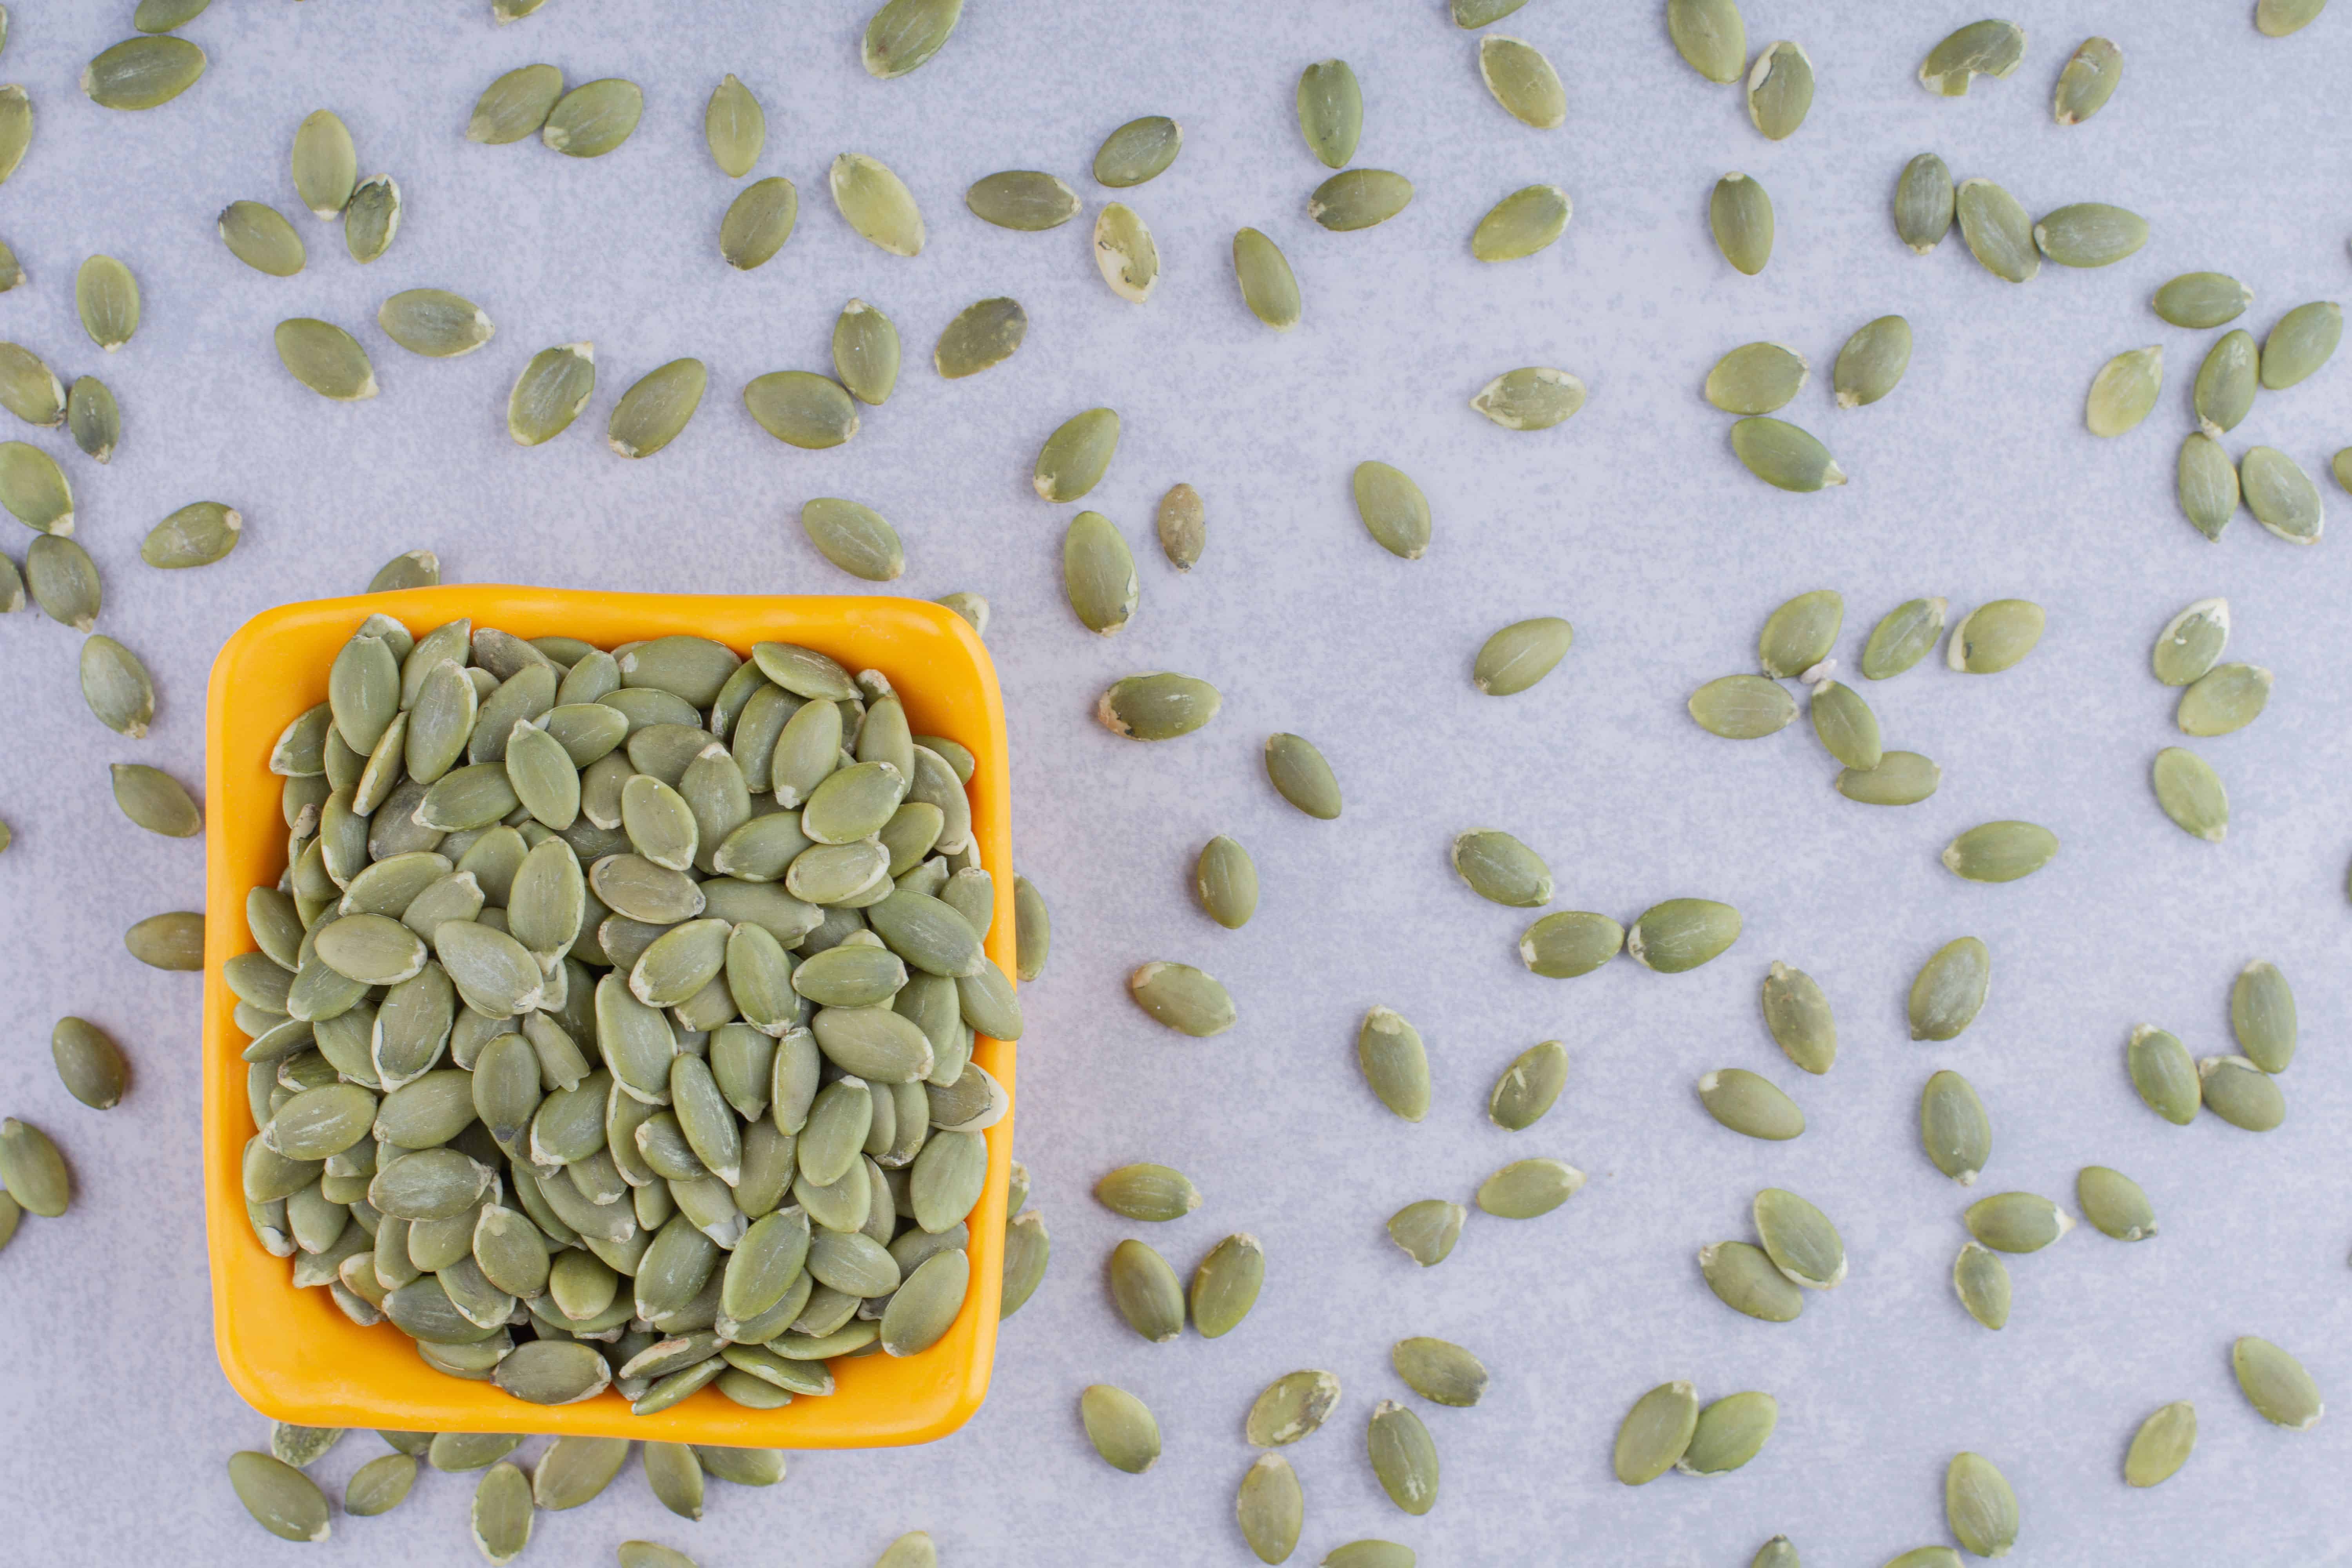 PUMPKINS SEEDS Eat a balanced and nutritious diet that includes healthy proteins and fats.